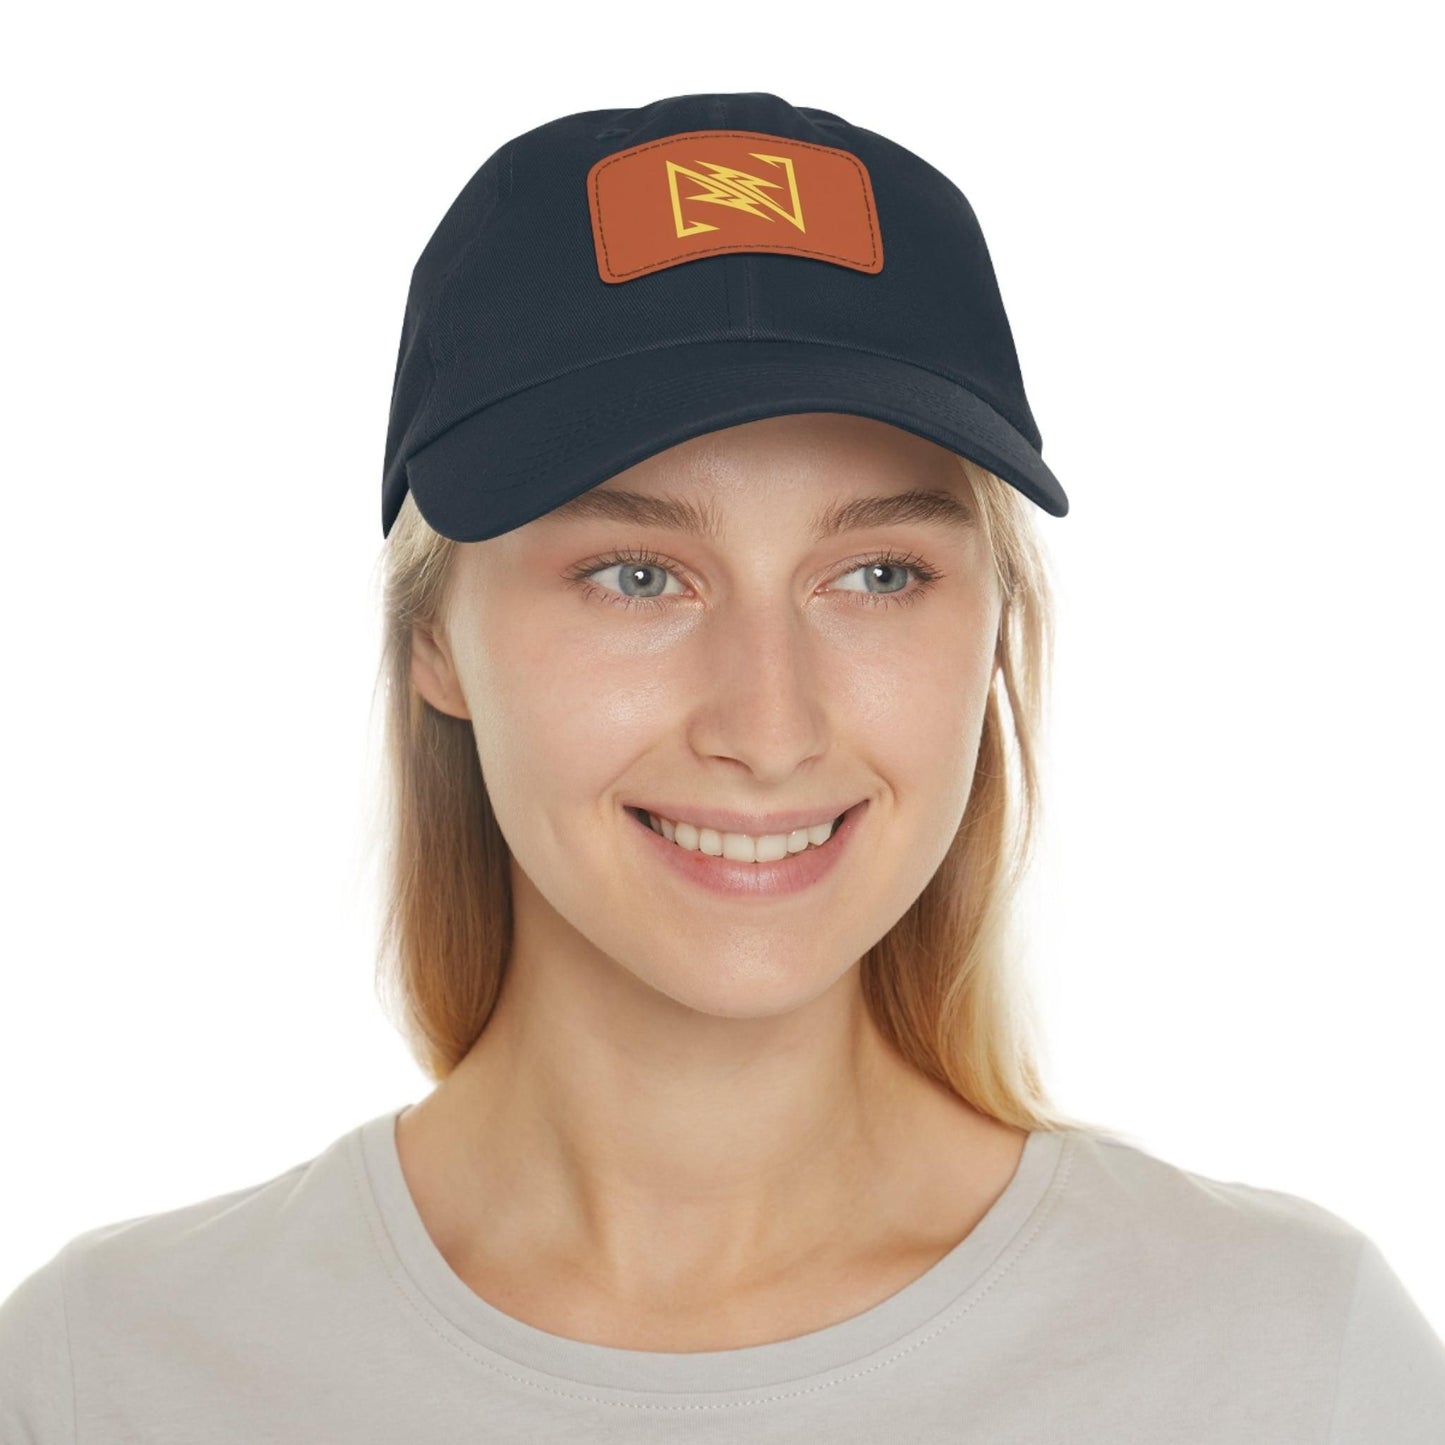 NX Vogue Premium Baseball Hat with Leather Patch Cap   